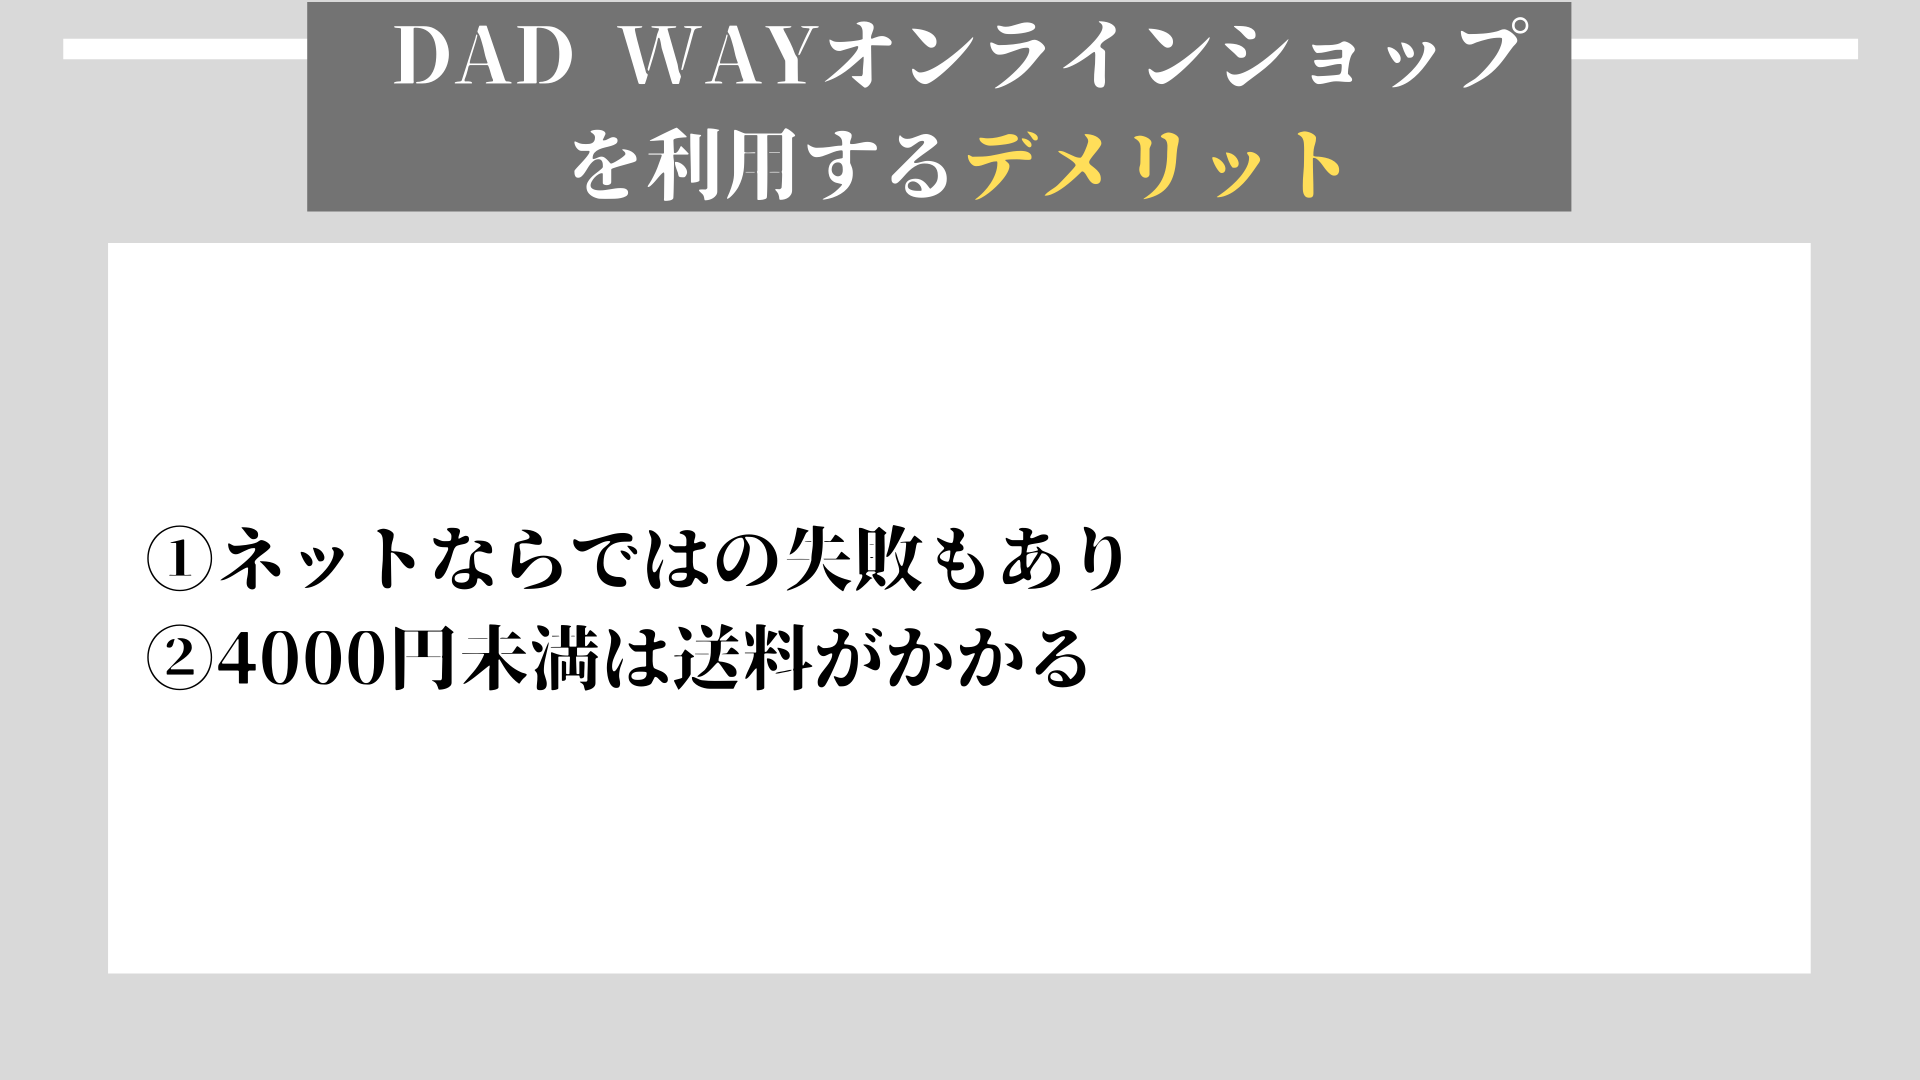 DAD WAY　デメリット